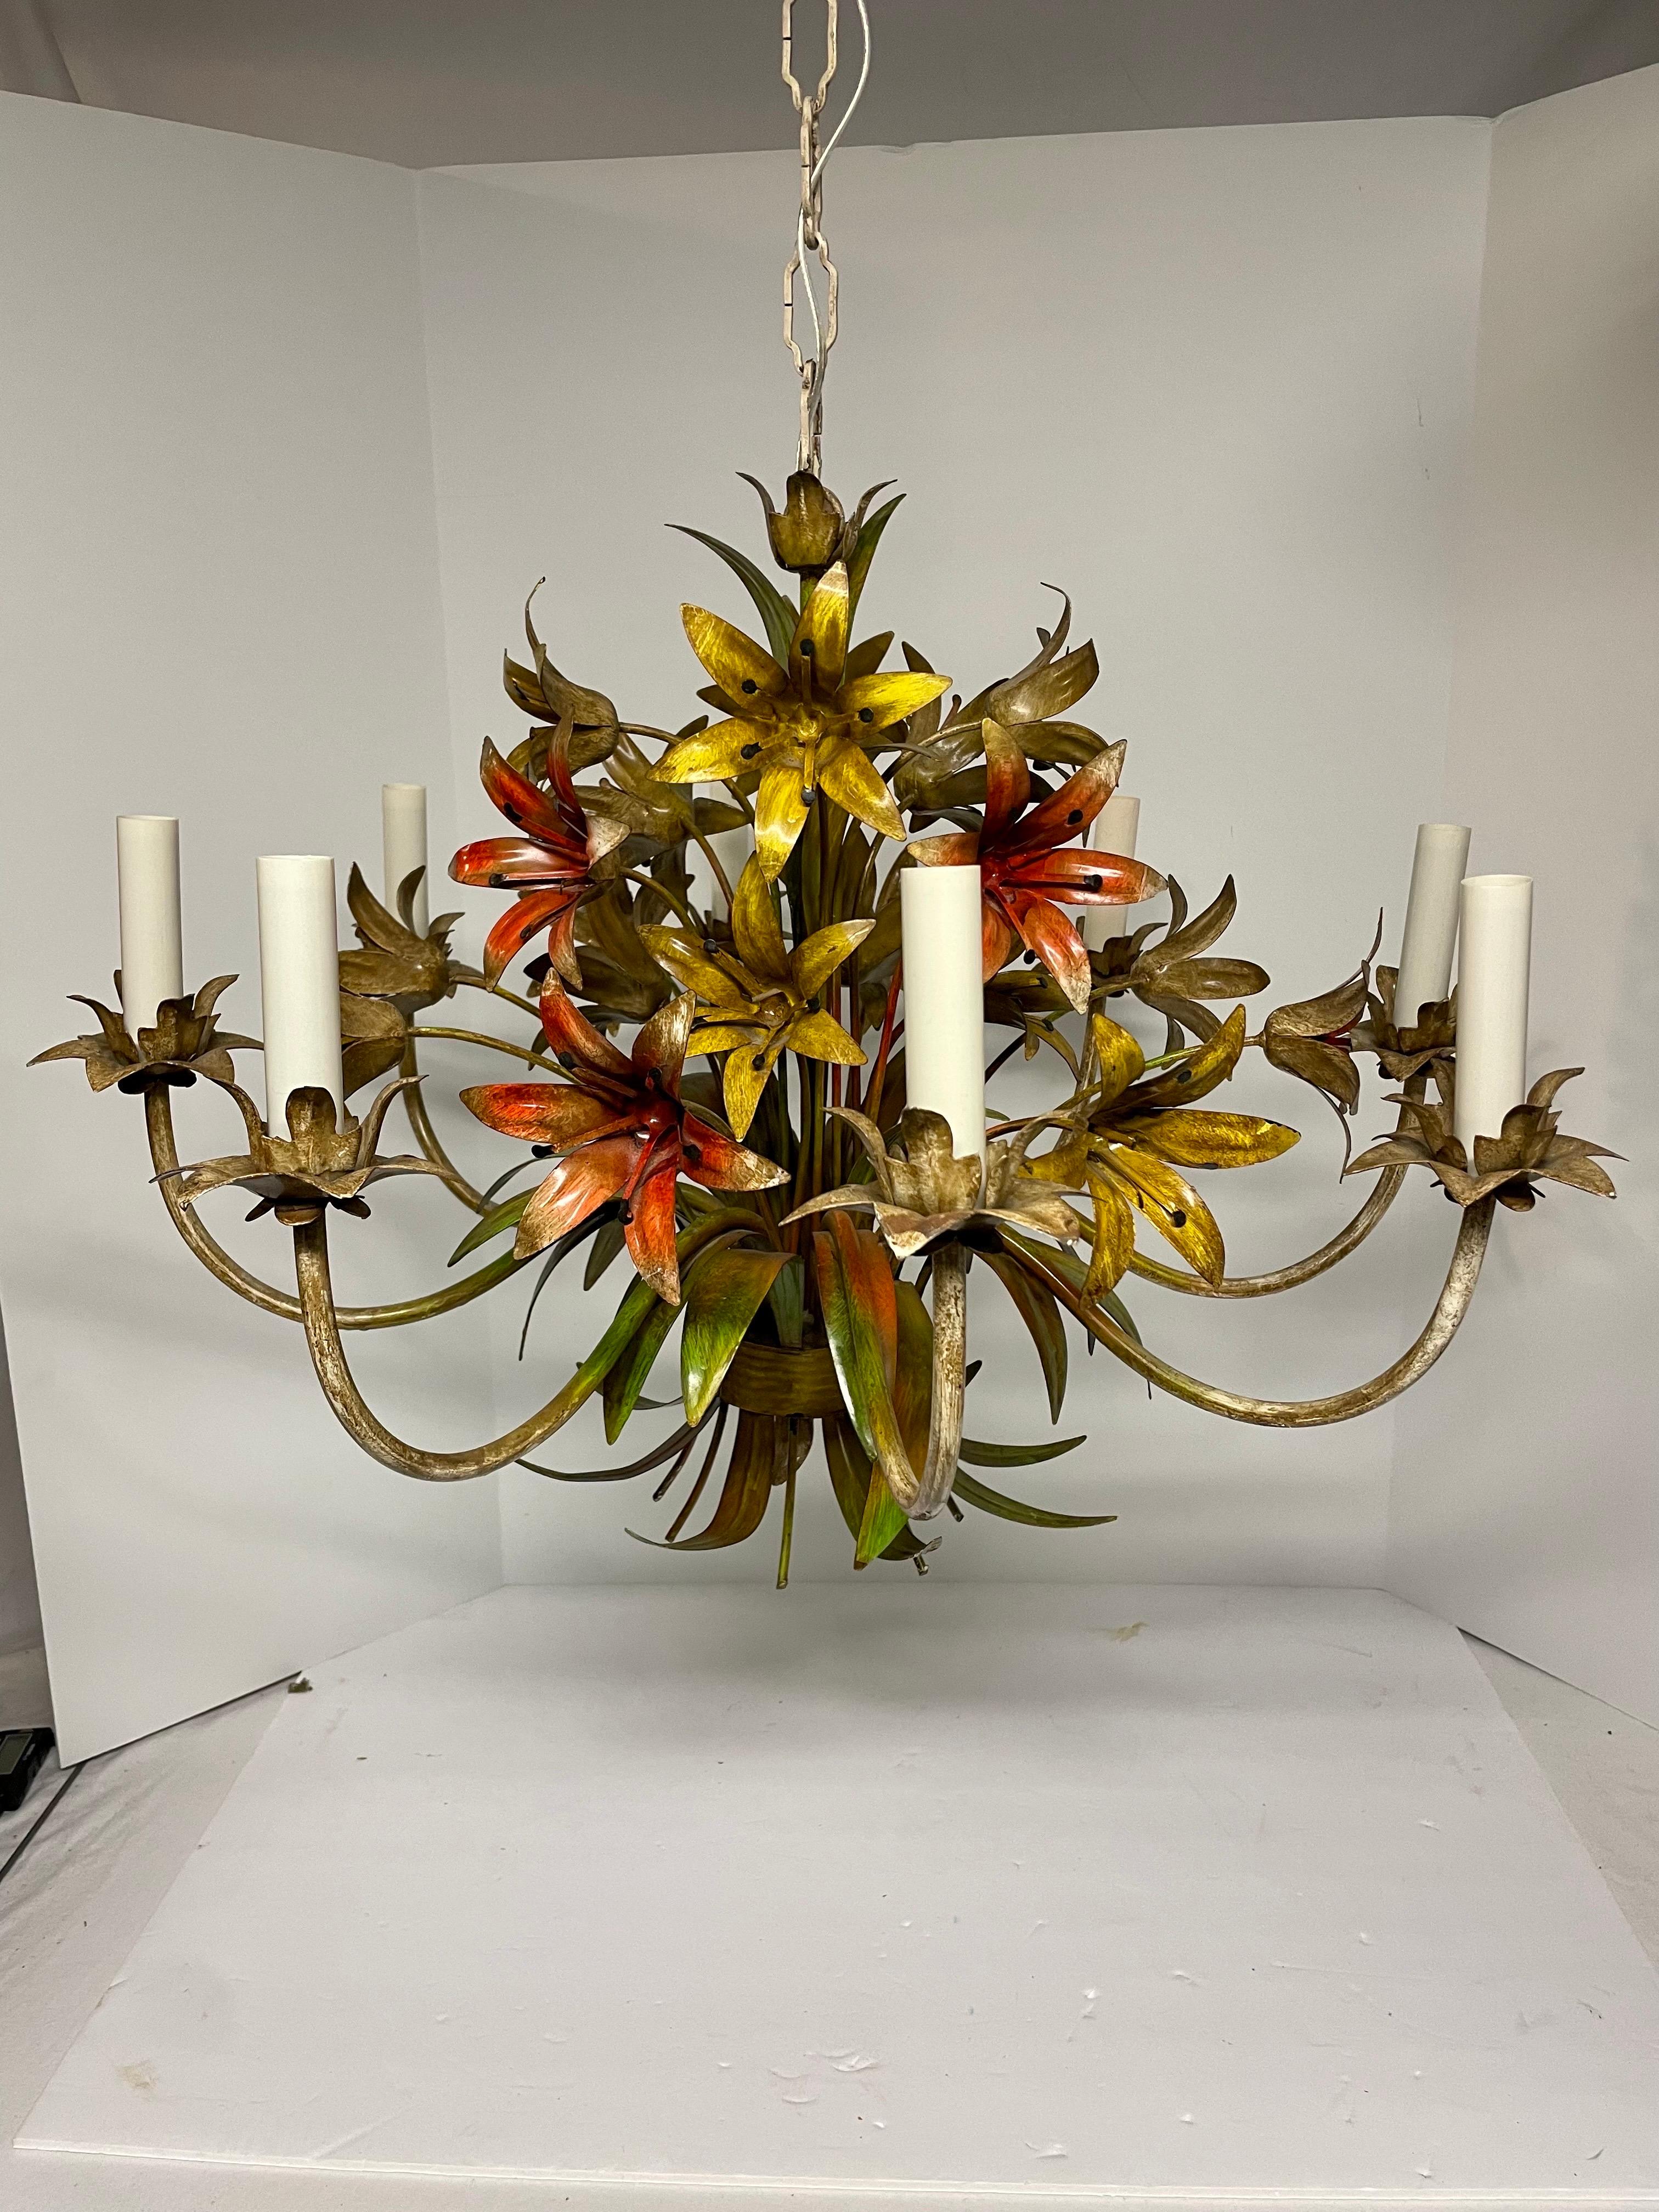 Large scale Italian floral tole six arm chandelier. Lots of  Lilly flowers in yellows and reds with greens and cream. Some chipping paint that adds to the character. Rewired. and in good working condition. Measures: 26